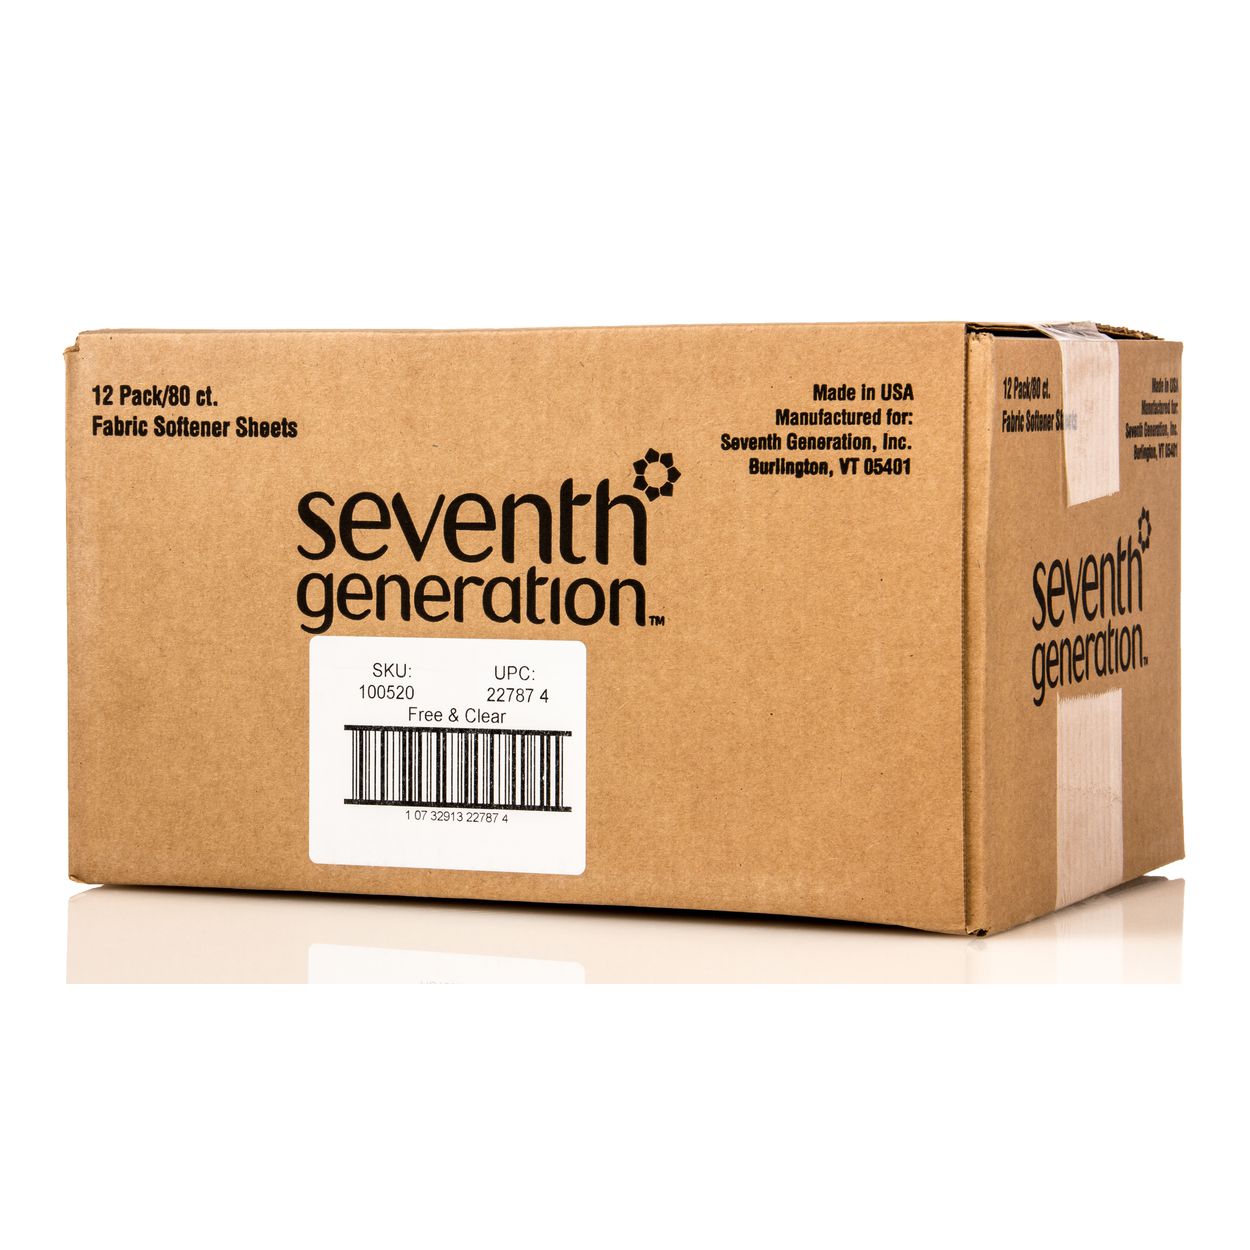 Seventh Generation Natural Fabric Softener Sheets, Free & Clear - 80 count